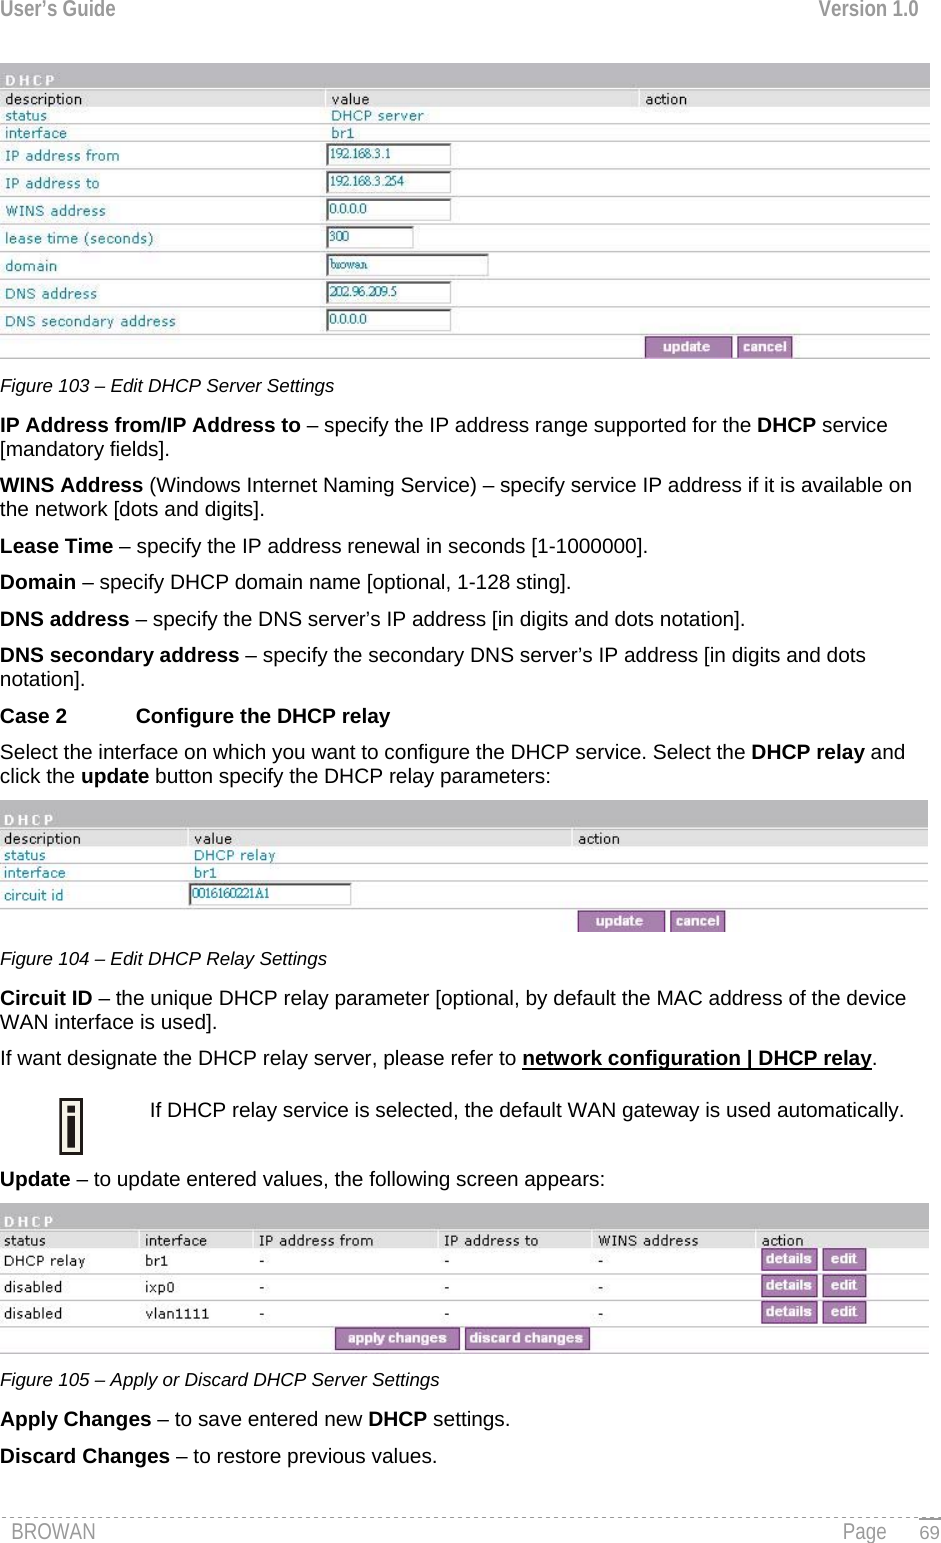 User’s Guide  Version 1.0   Figure 103 – Edit DHCP Server Settings  IP Address from/IP Address to – specify the IP address range supported for the DHCP service [mandatory fields]. WINS Address (Windows Internet Naming Service) – specify service IP address if it is available on the network [dots and digits]. Lease Time – specify the IP address renewal in seconds [1-1000000]. Domain – specify DHCP domain name [optional, 1-128 sting]. DNS address – specify the DNS server’s IP address [in digits and dots notation]. DNS secondary address – specify the secondary DNS server’s IP address [in digits and dots notation]. Case 2  Configure the DHCP relay Select the interface on which you want to configure the DHCP service. Select the DHCP relay and click the update button specify the DHCP relay parameters:  Figure 104 – Edit DHCP Relay Settings Circuit ID – the unique DHCP relay parameter [optional, by default the MAC address of the device WAN interface is used]. If want designate the DHCP relay server, please refer to network configuration | DHCP relay. If DHCP relay service is selected, the default WAN gateway is used automatically.  Update – to update entered values, the following screen appears:  Figure 105 – Apply or Discard DHCP Server Settings Apply Changes – to save entered new DHCP settings. Discard Changes – to restore previous values.  BROWAN                                                                                                                                               Page   69